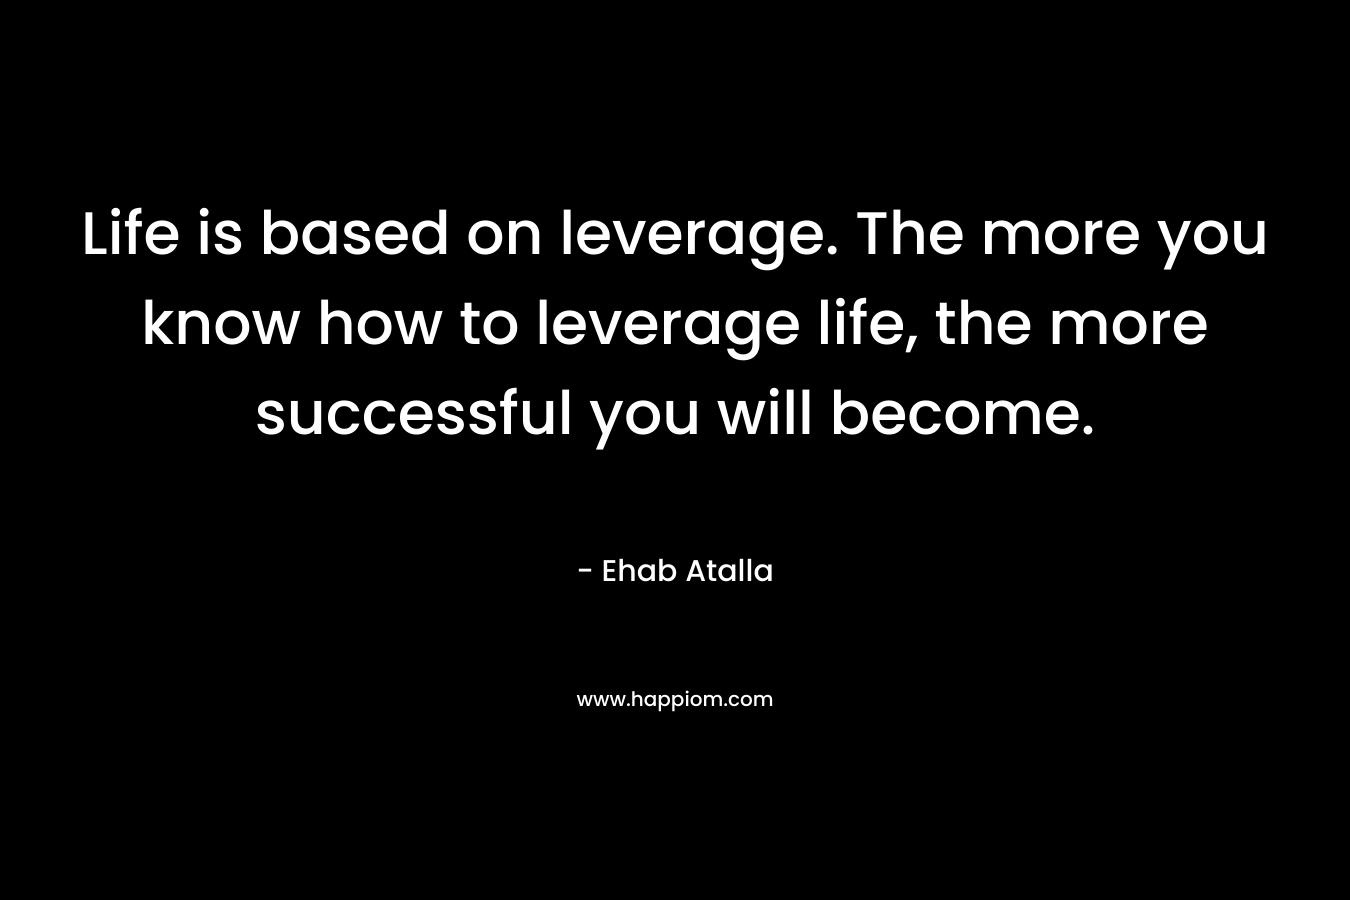 Life is based on leverage. The more you know how to leverage life, the more successful you will become.